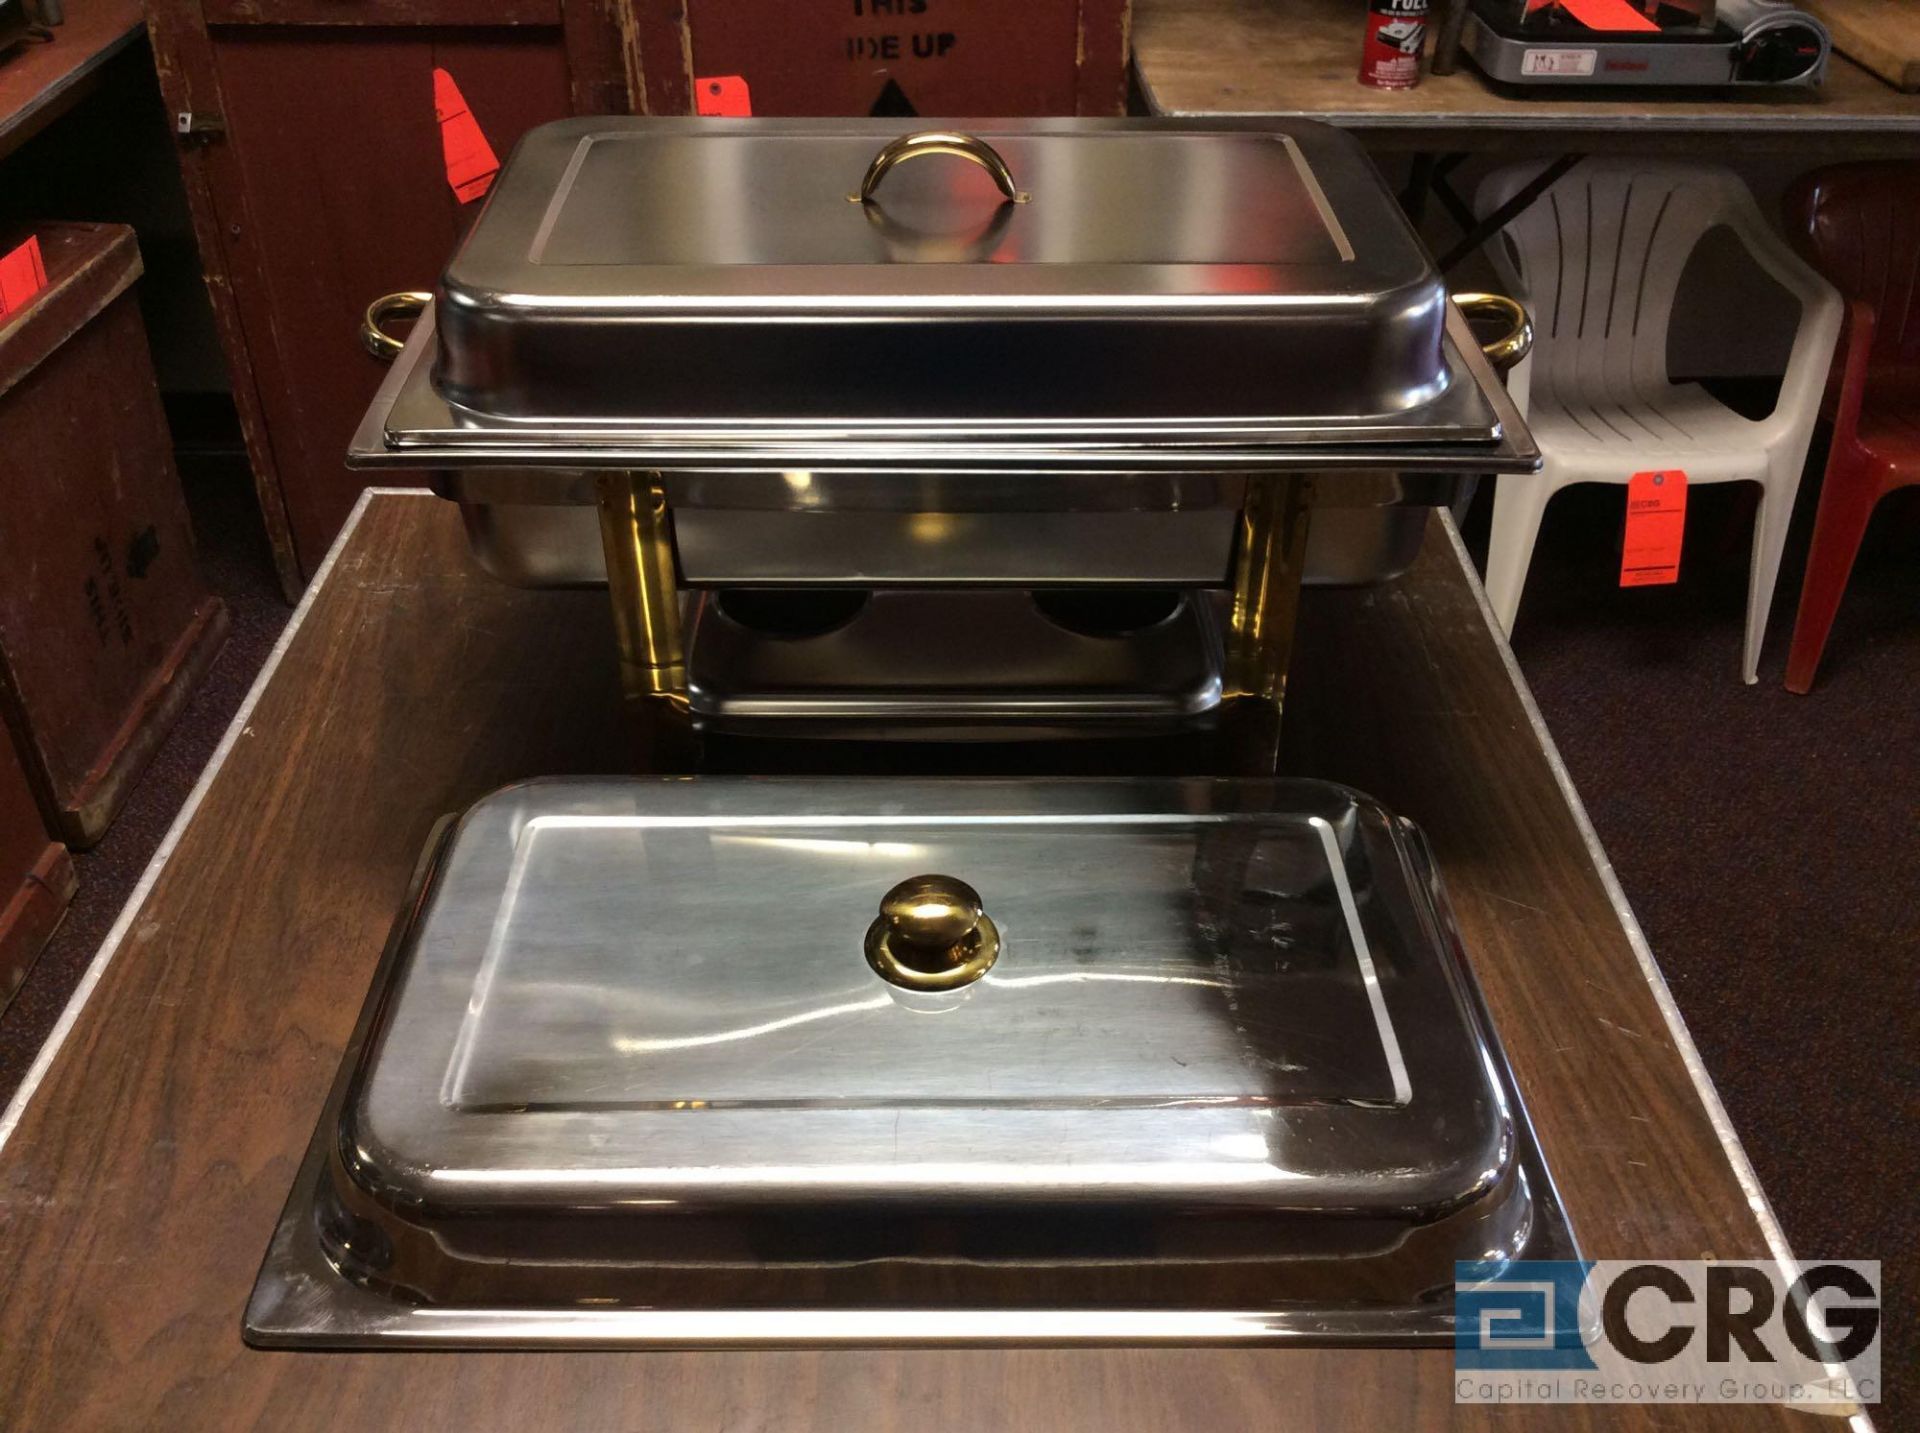 Lot of (4) 8 Qt assorted chafing dishes, rectangular stainless with brass metal handles, 12 x 20